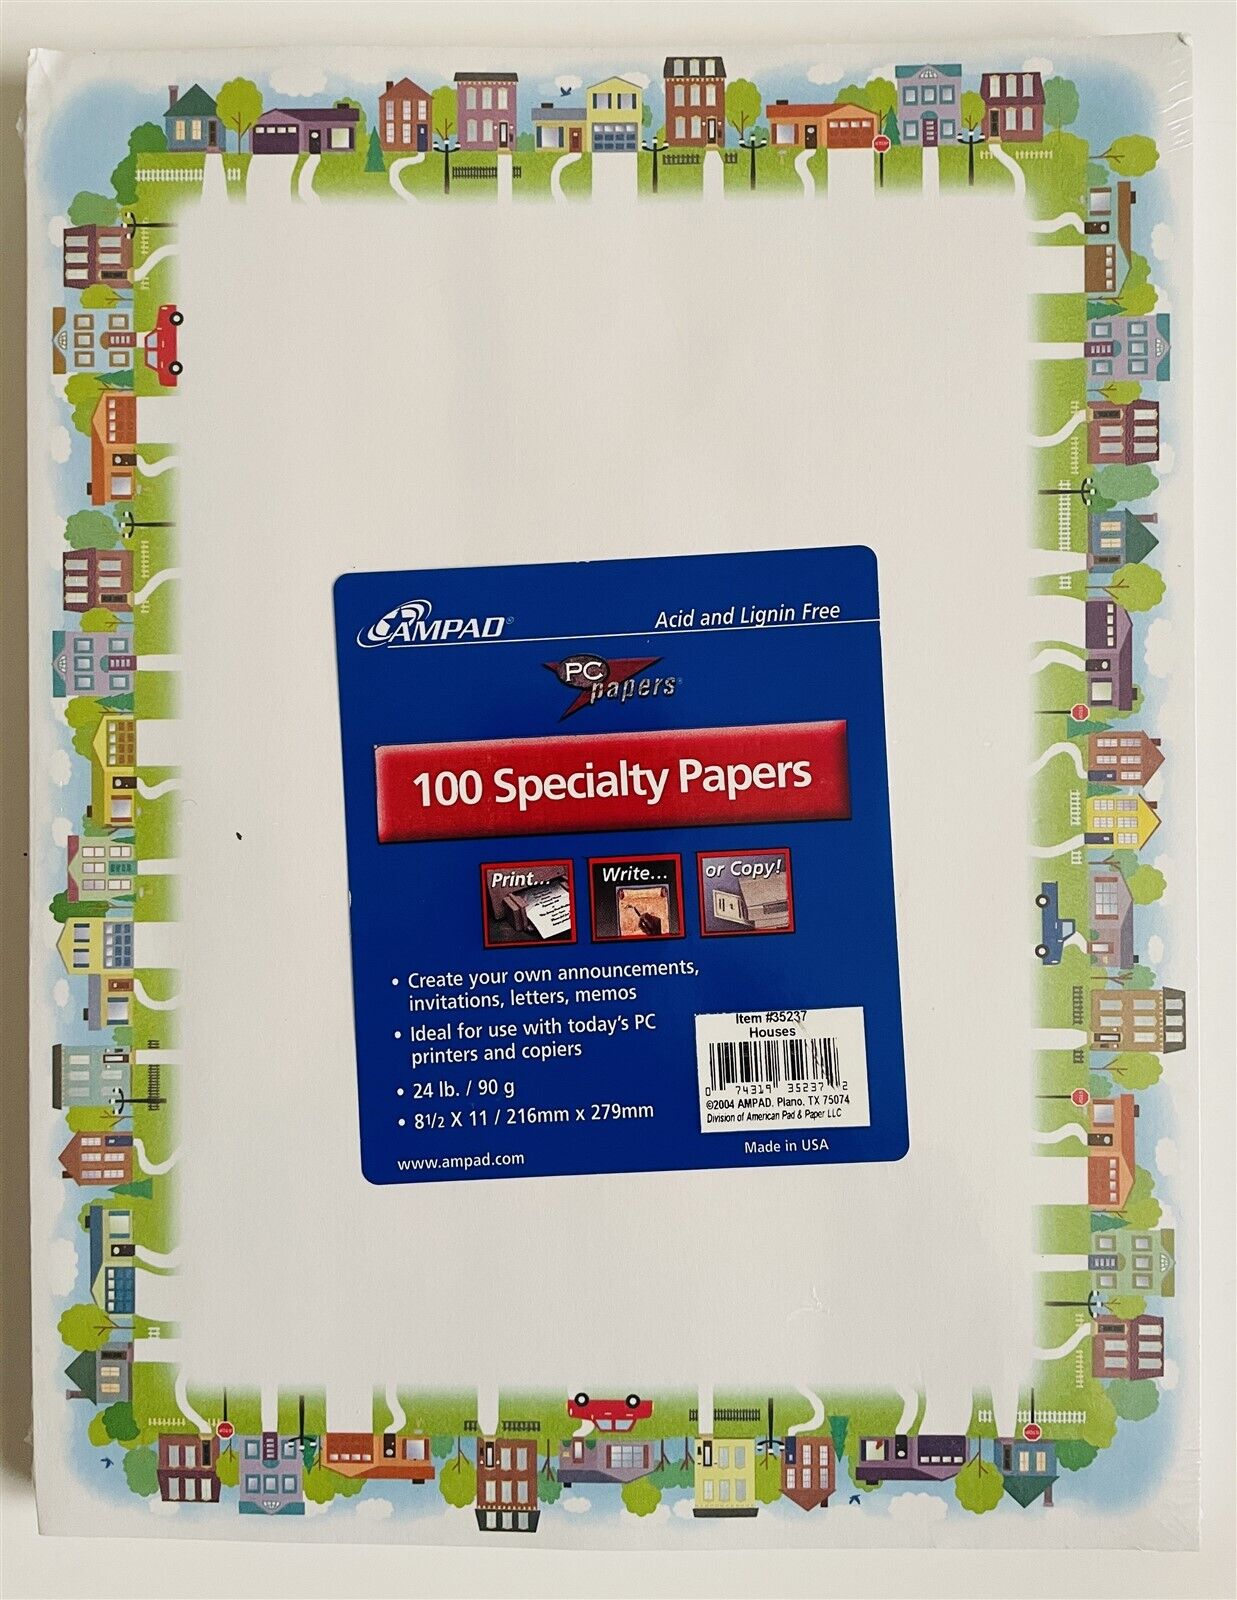 Ampad 100 Specialty PC Papers Stationery with Houses Border - 24 lb.